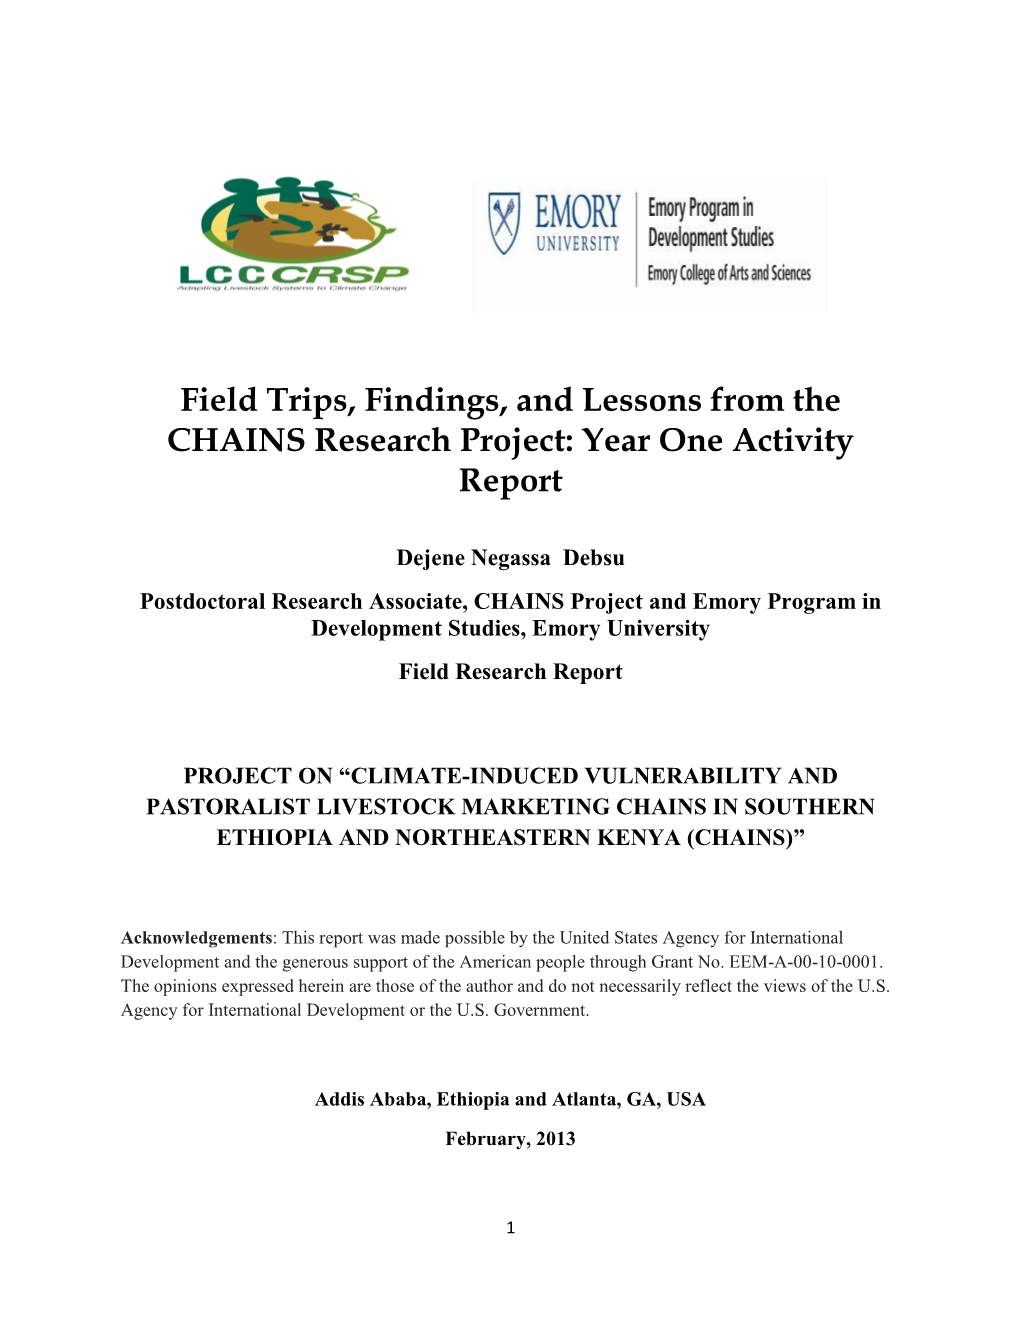 Field Trips, Findings, and Lessons from the CHAINS Research Project: Year One Activity Report